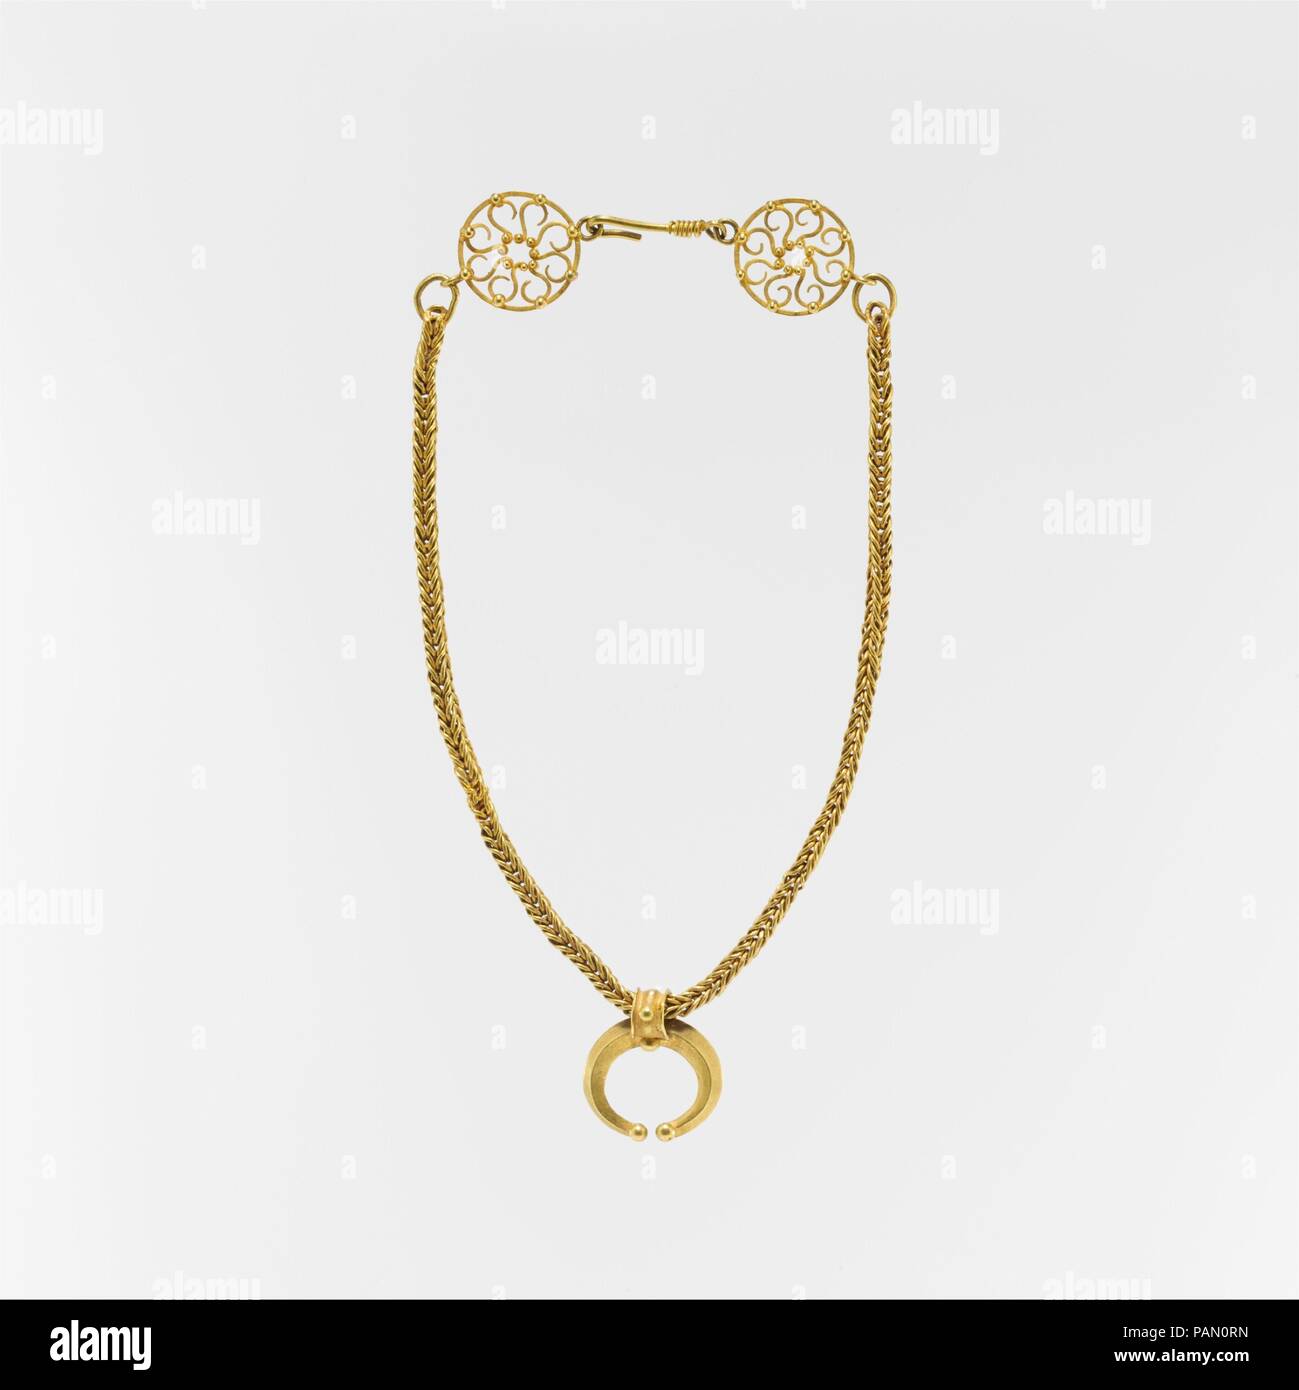 Gold necklace with crescent-shaped pendant. Culture: Roman. Dimensions: Other: 14 1/2 in. (36.8 cm). Date: 1st-3rd century A.D..  Some styles of Roman jewelry were both very long-lived and used throughout the Empire. The wheel-shaped finials and the crescent pendant, symbolic of the sun and moon, that decorate this necklace are found in jewelry from a hoard found in Britain dated to the mid-second century and in depictions on Roman mummy portraits from Egypt. Museum: Metropolitan Museum of Art, New York, USA. Stock Photo